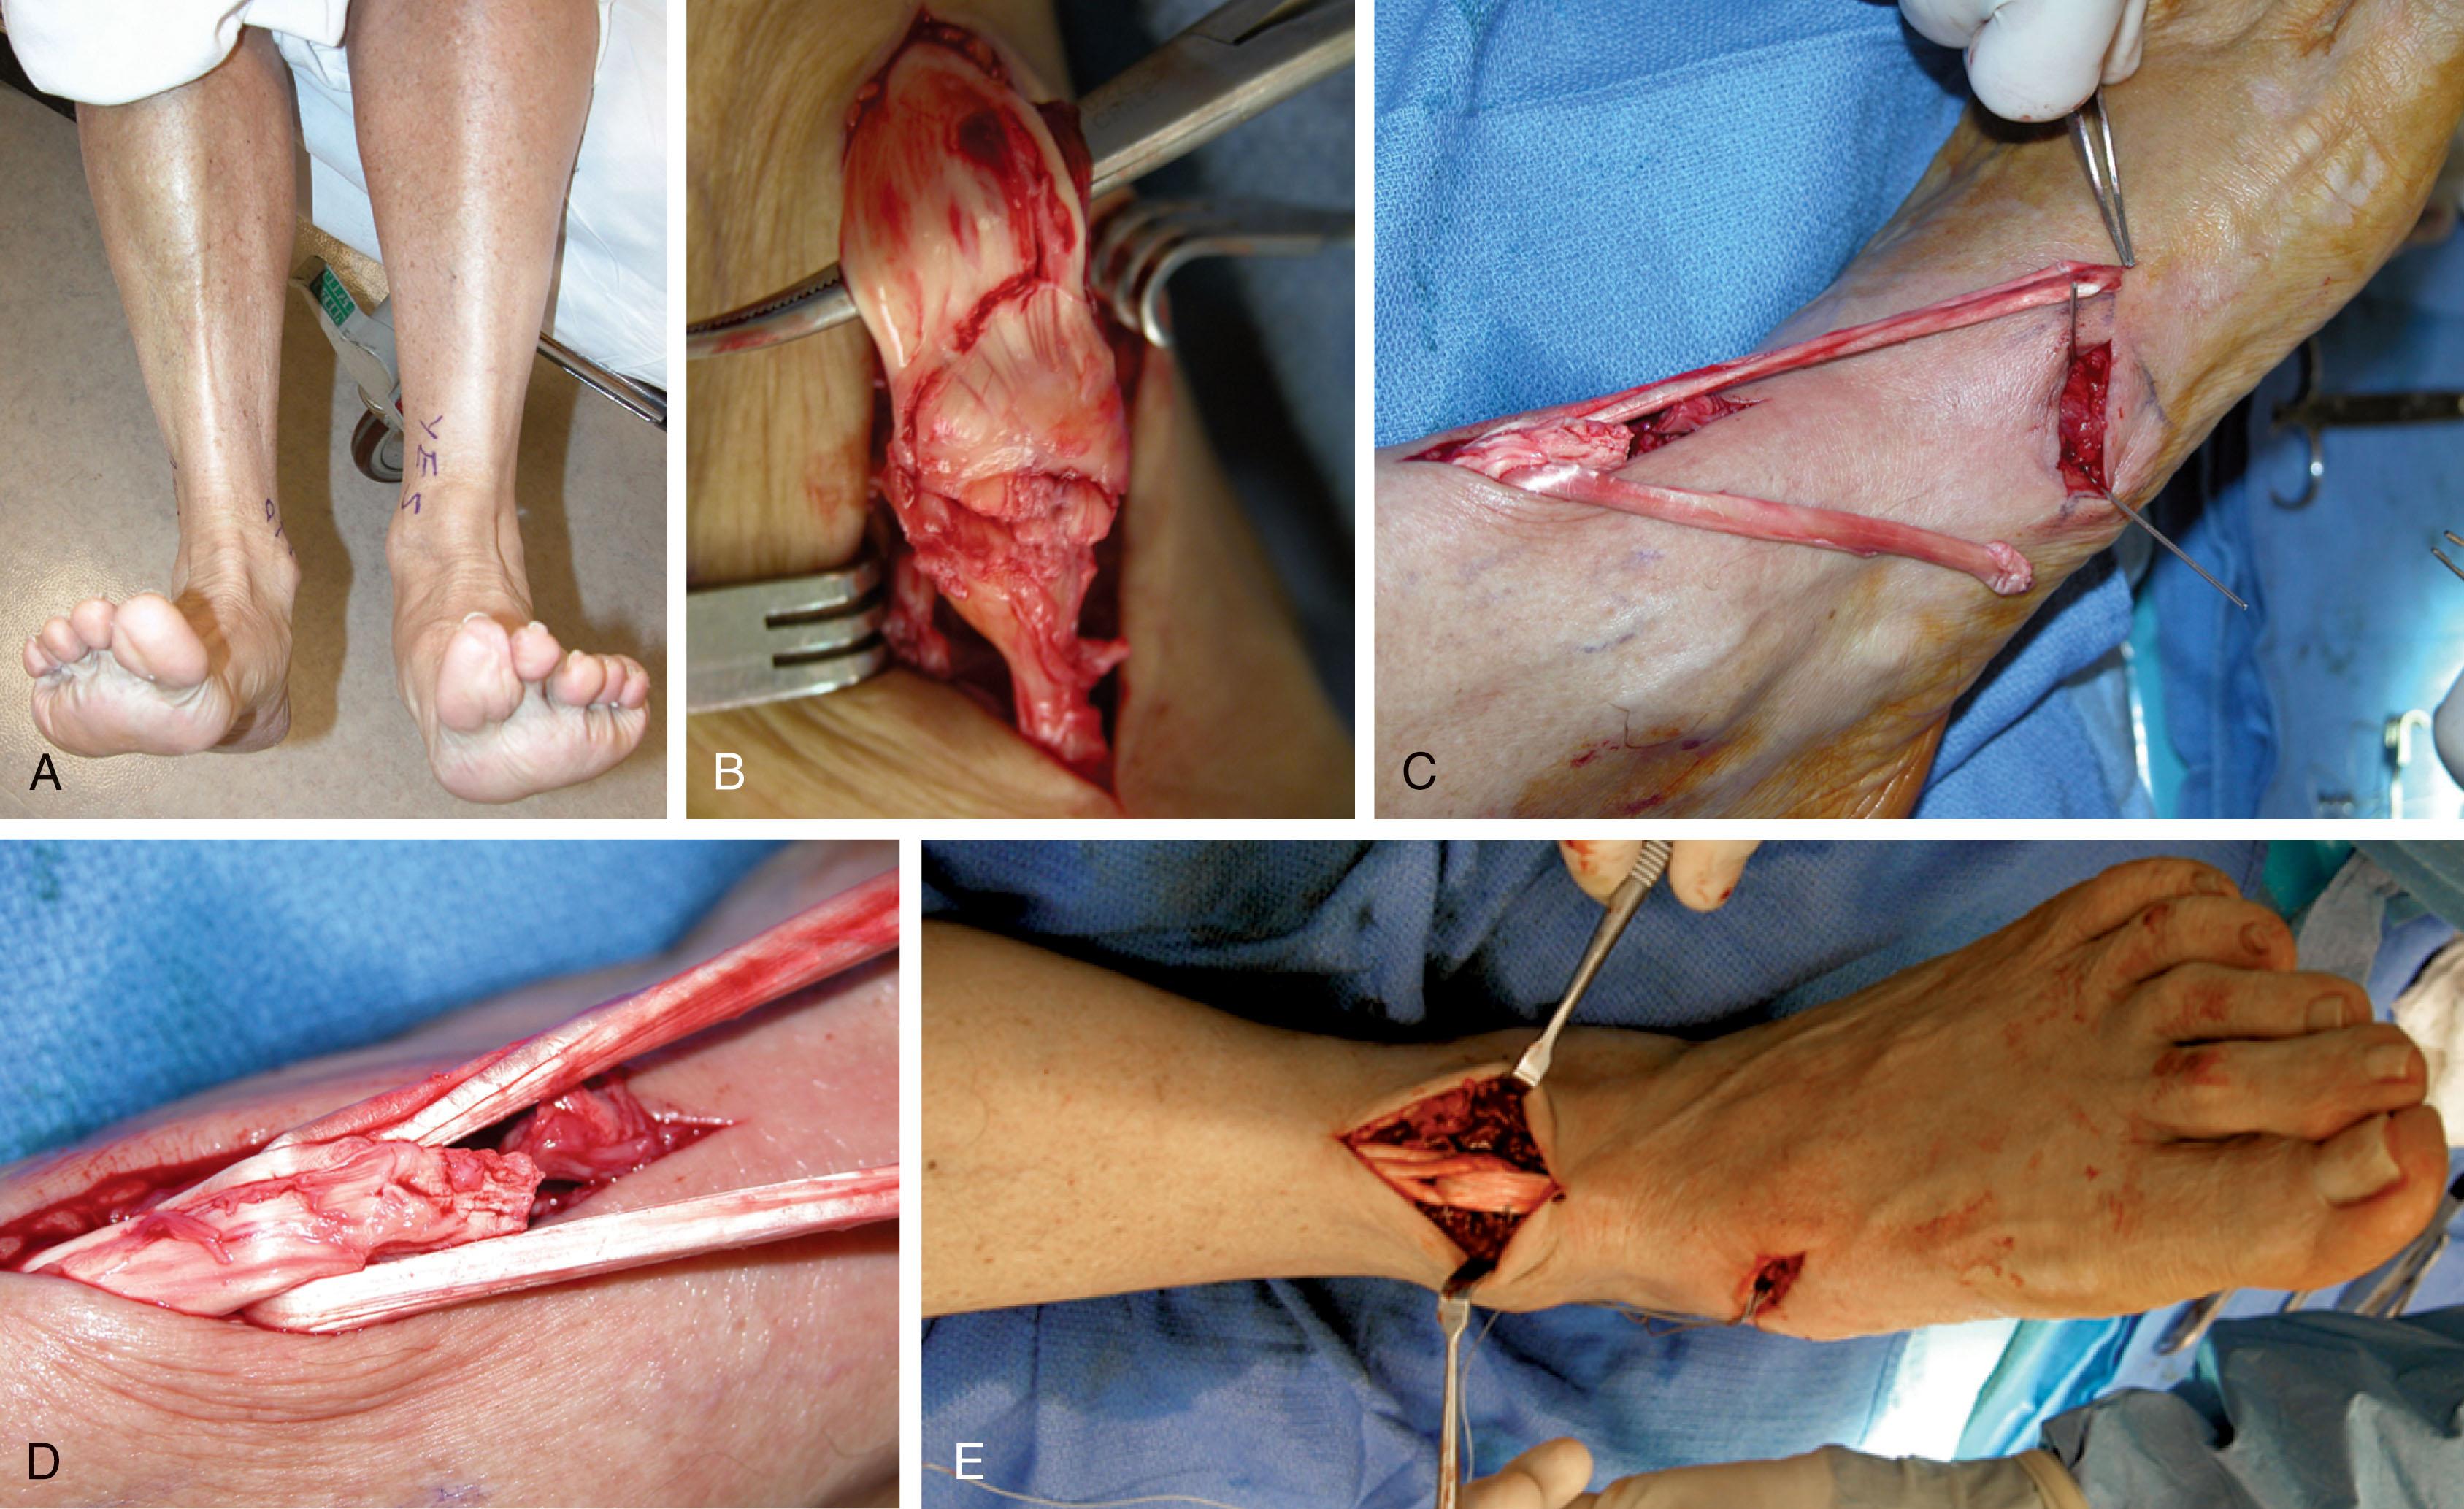 Fig. 28-16, A , Delayed diagnosis of rupture of anterior tibial tendon (left ankle). Note that the injured ankle dorsiflexes less and everts more. The medial ray is still relatively plantar flexed. B , Intraoperative photograph of rupture. C , Free tendon graft is passed through the distal end of the healthier aspect of the tendon, creating two graft ends for attachment. One limb is passed into a tunnel in the dorsal aspect of the cuneiform, and the other is passed into a more plantar medial tunnel as indicated by the protruding wires. The graft is secured using 6- to 7-mm–wide soft tissue interference screws. D , Close-up of graft through the anterior tibial tendon. E , After completion of repair. Tensioning the graft is critical to achieve dorsiflexion.